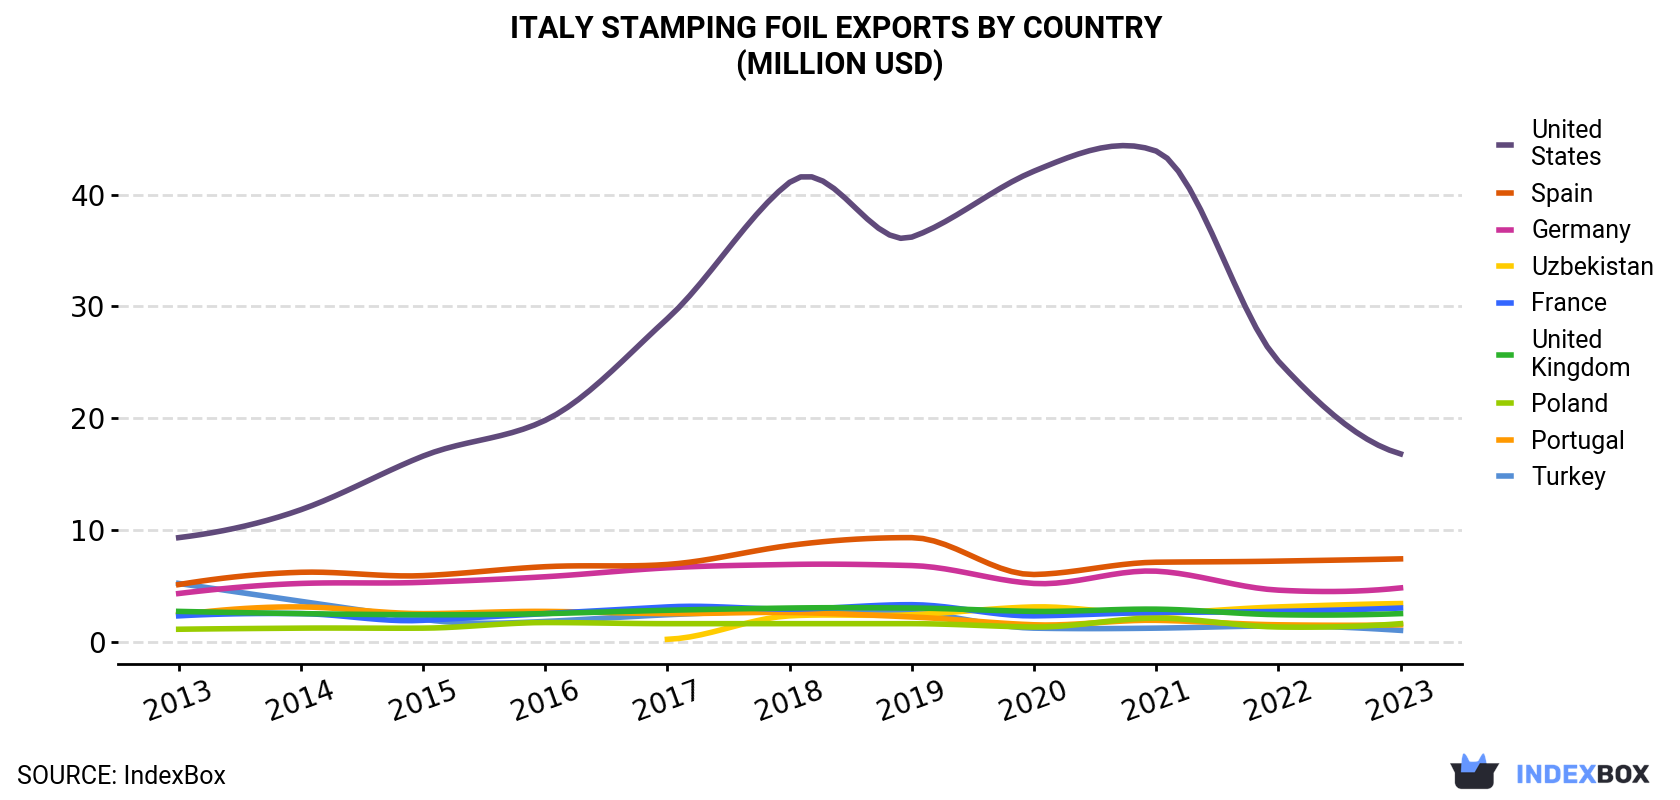 Italy Stamping Foil Exports By Country (Million USD)